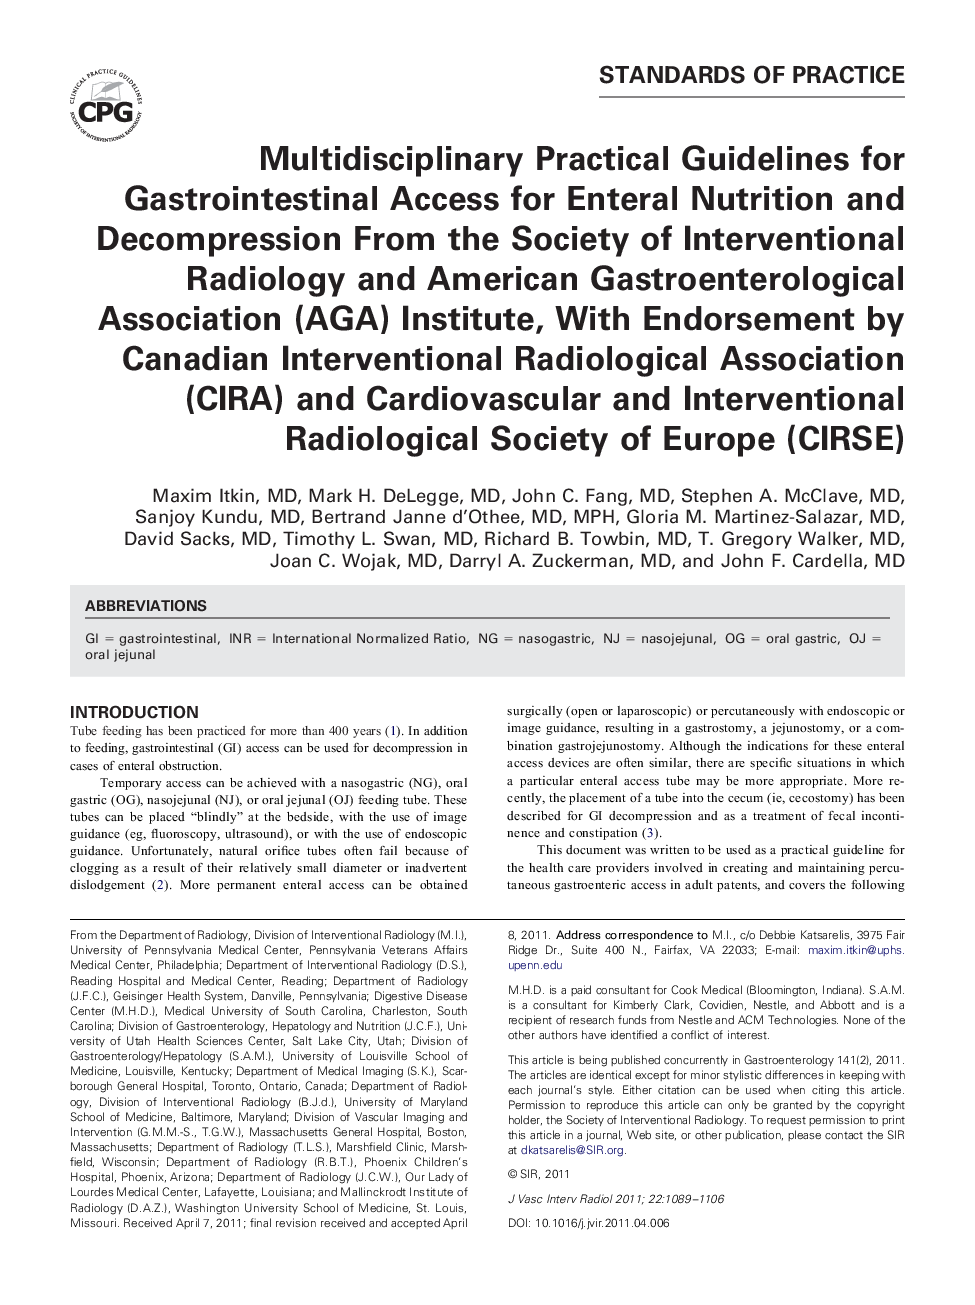 Multidisciplinary Practical Guidelines for Gastrointestinal Access for Enteral Nutrition and Decompression From the Society of Interventional Radiology and American Gastroenterological Association (AGA) Institute, With Endorsement by Canadian Intervention